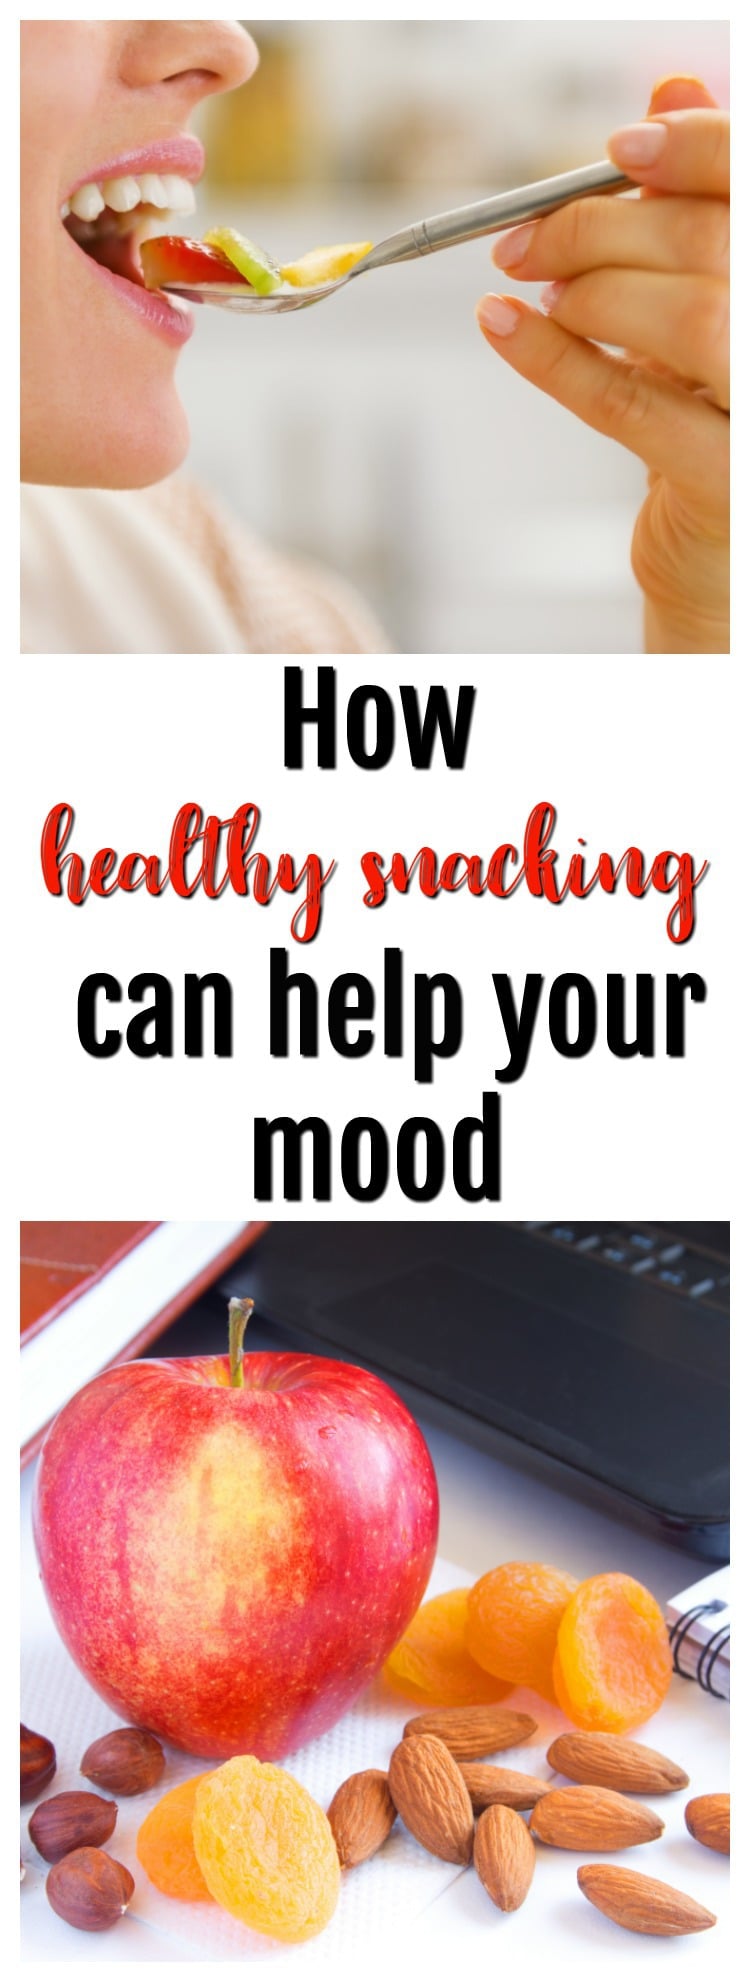 How healthy snacking helps your mood_1